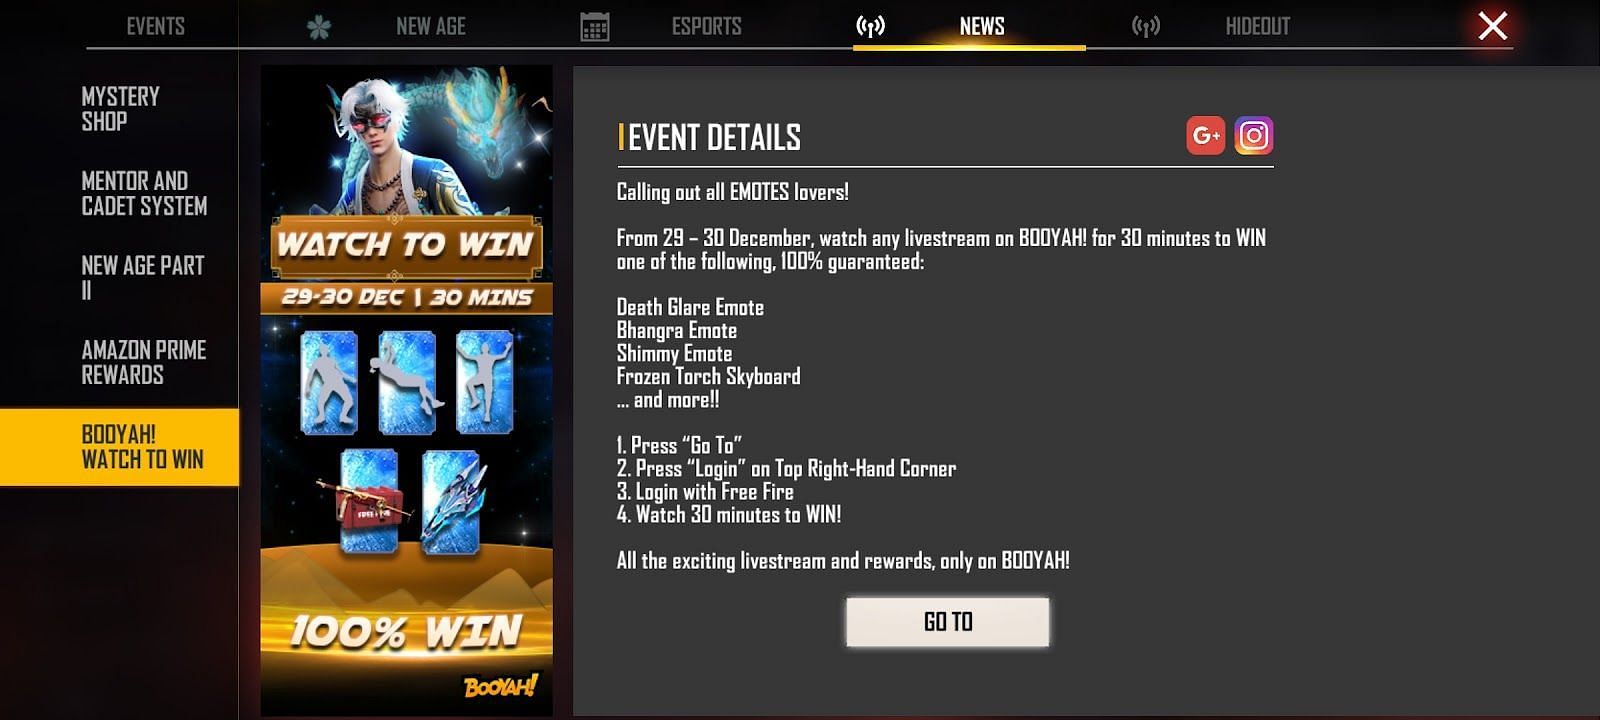 Watching Free Fire content on the &quot;Booyah!&quot; App allows players to acquire free rewards (Image via Garena)